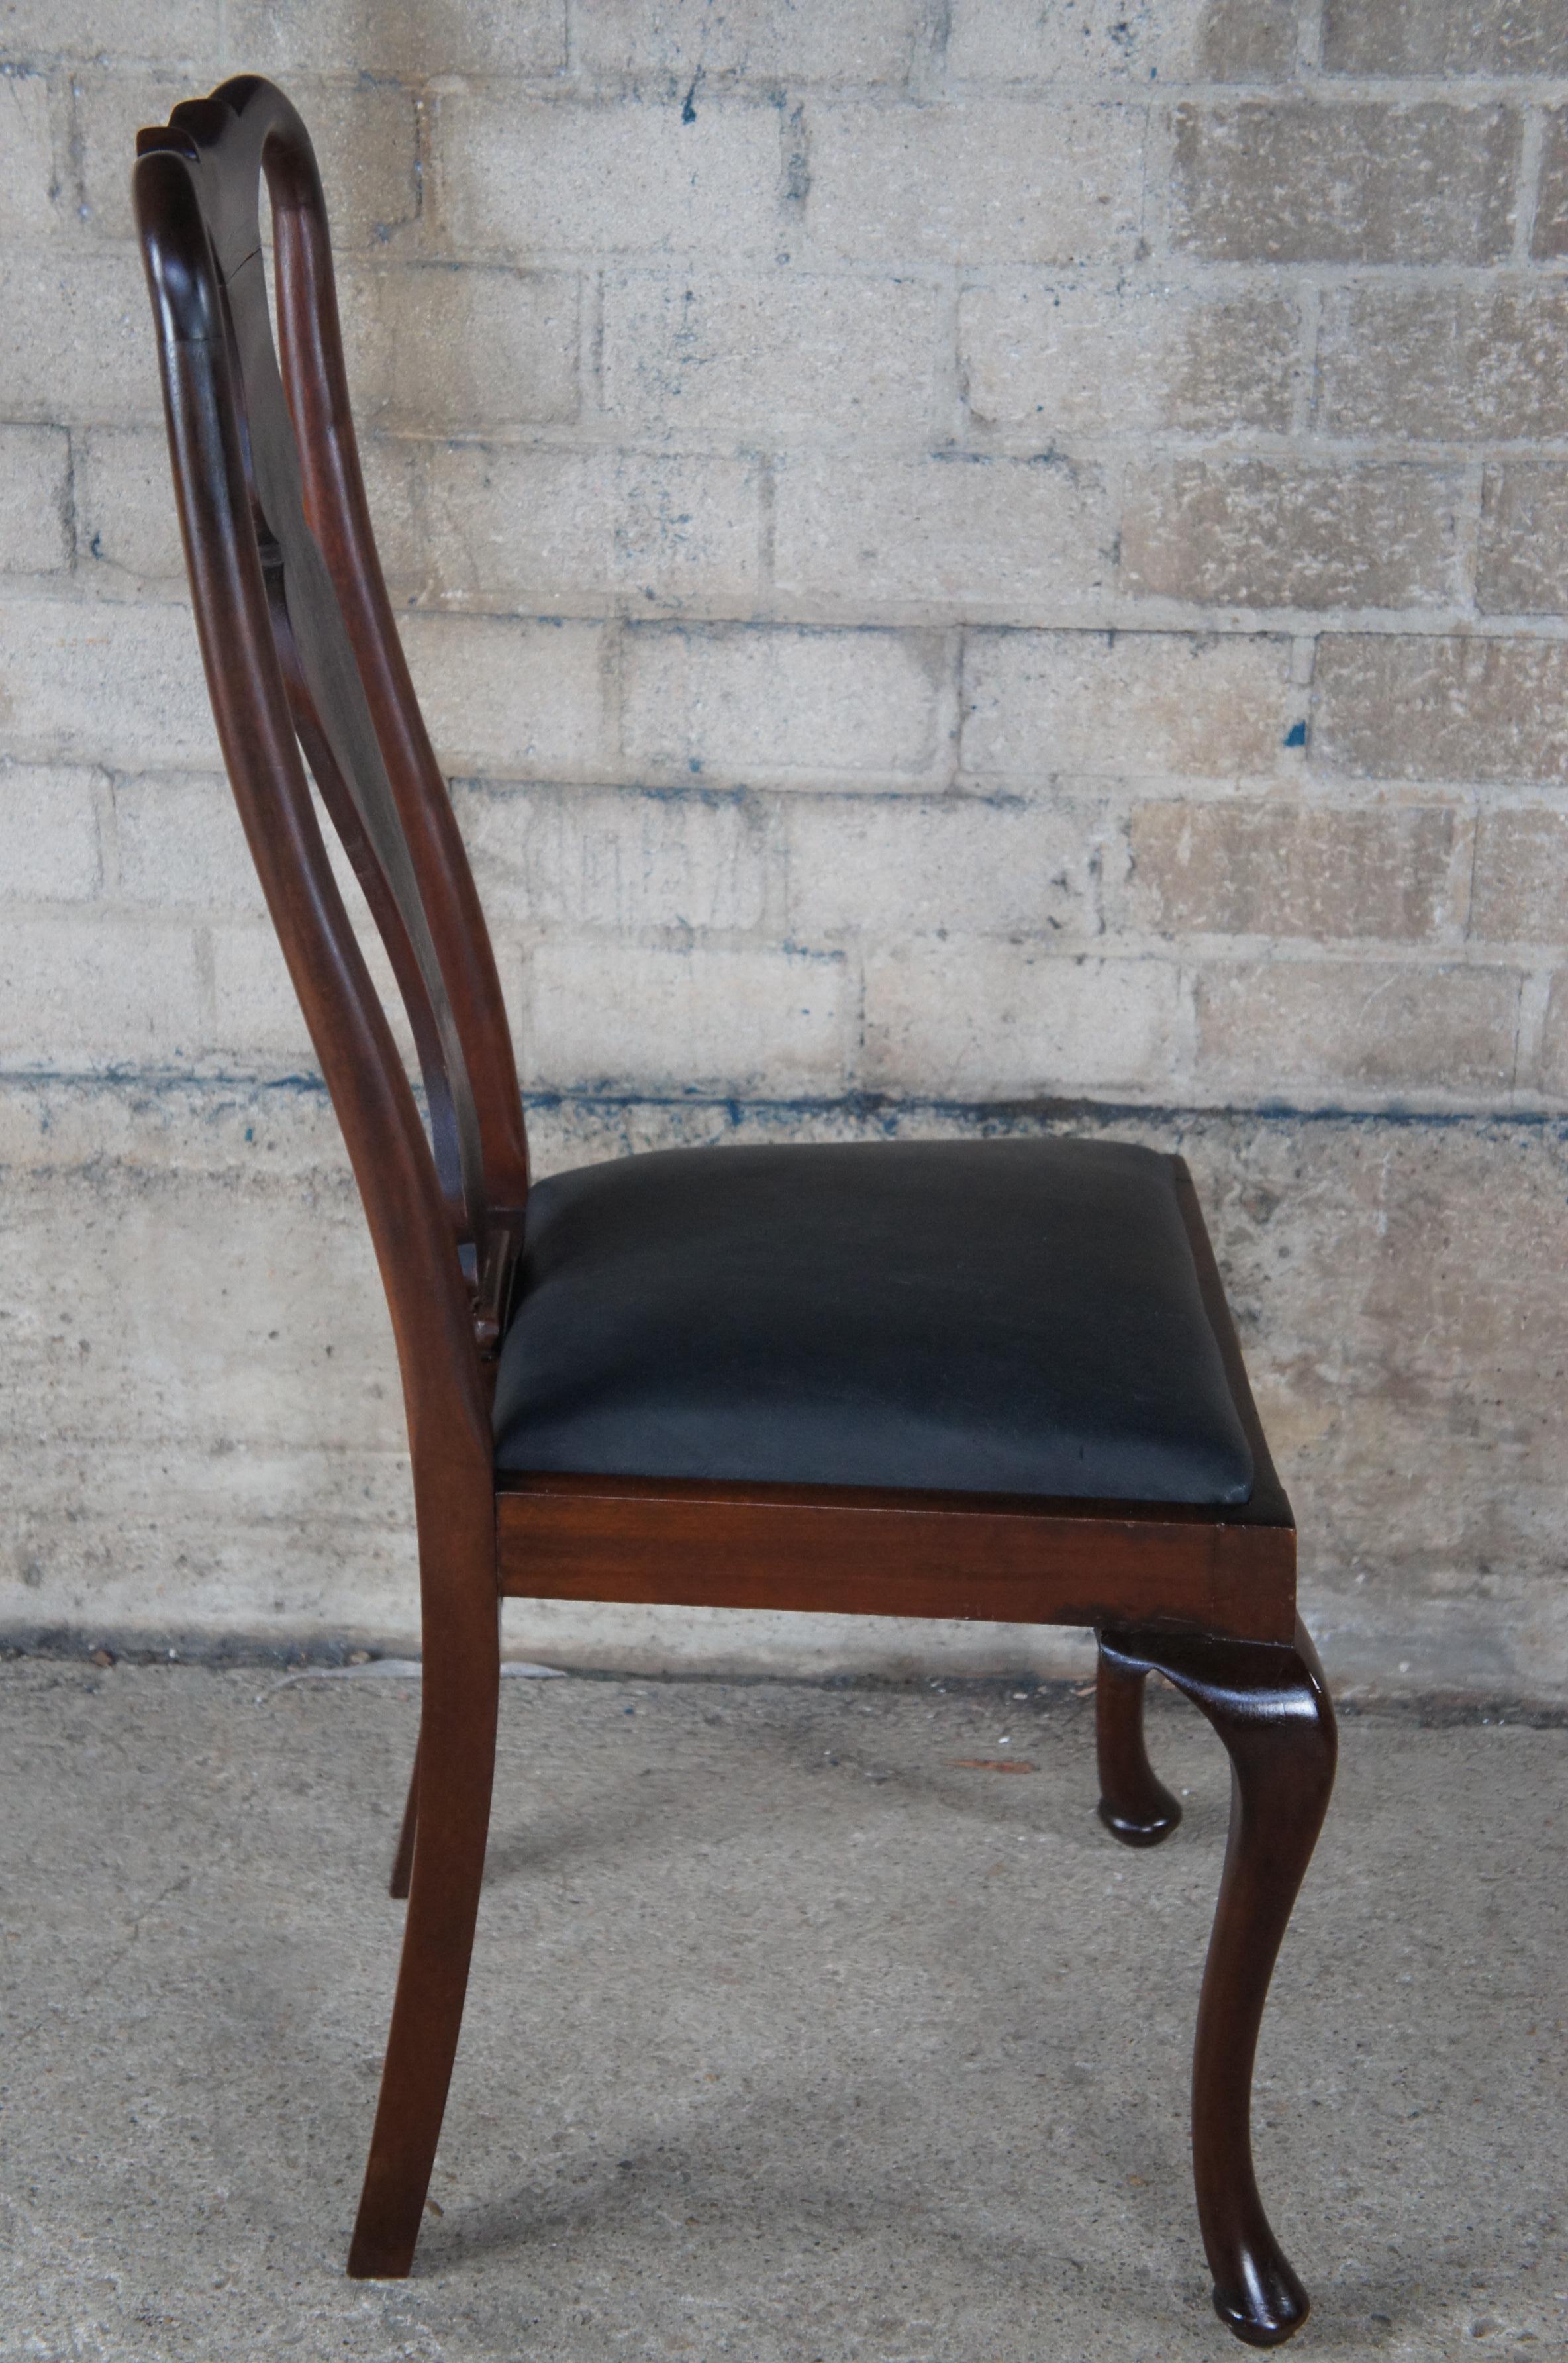 Antique Queen Anne Mahogany Black Deerskin Leather High Back Dining Desk Chair  For Sale 6